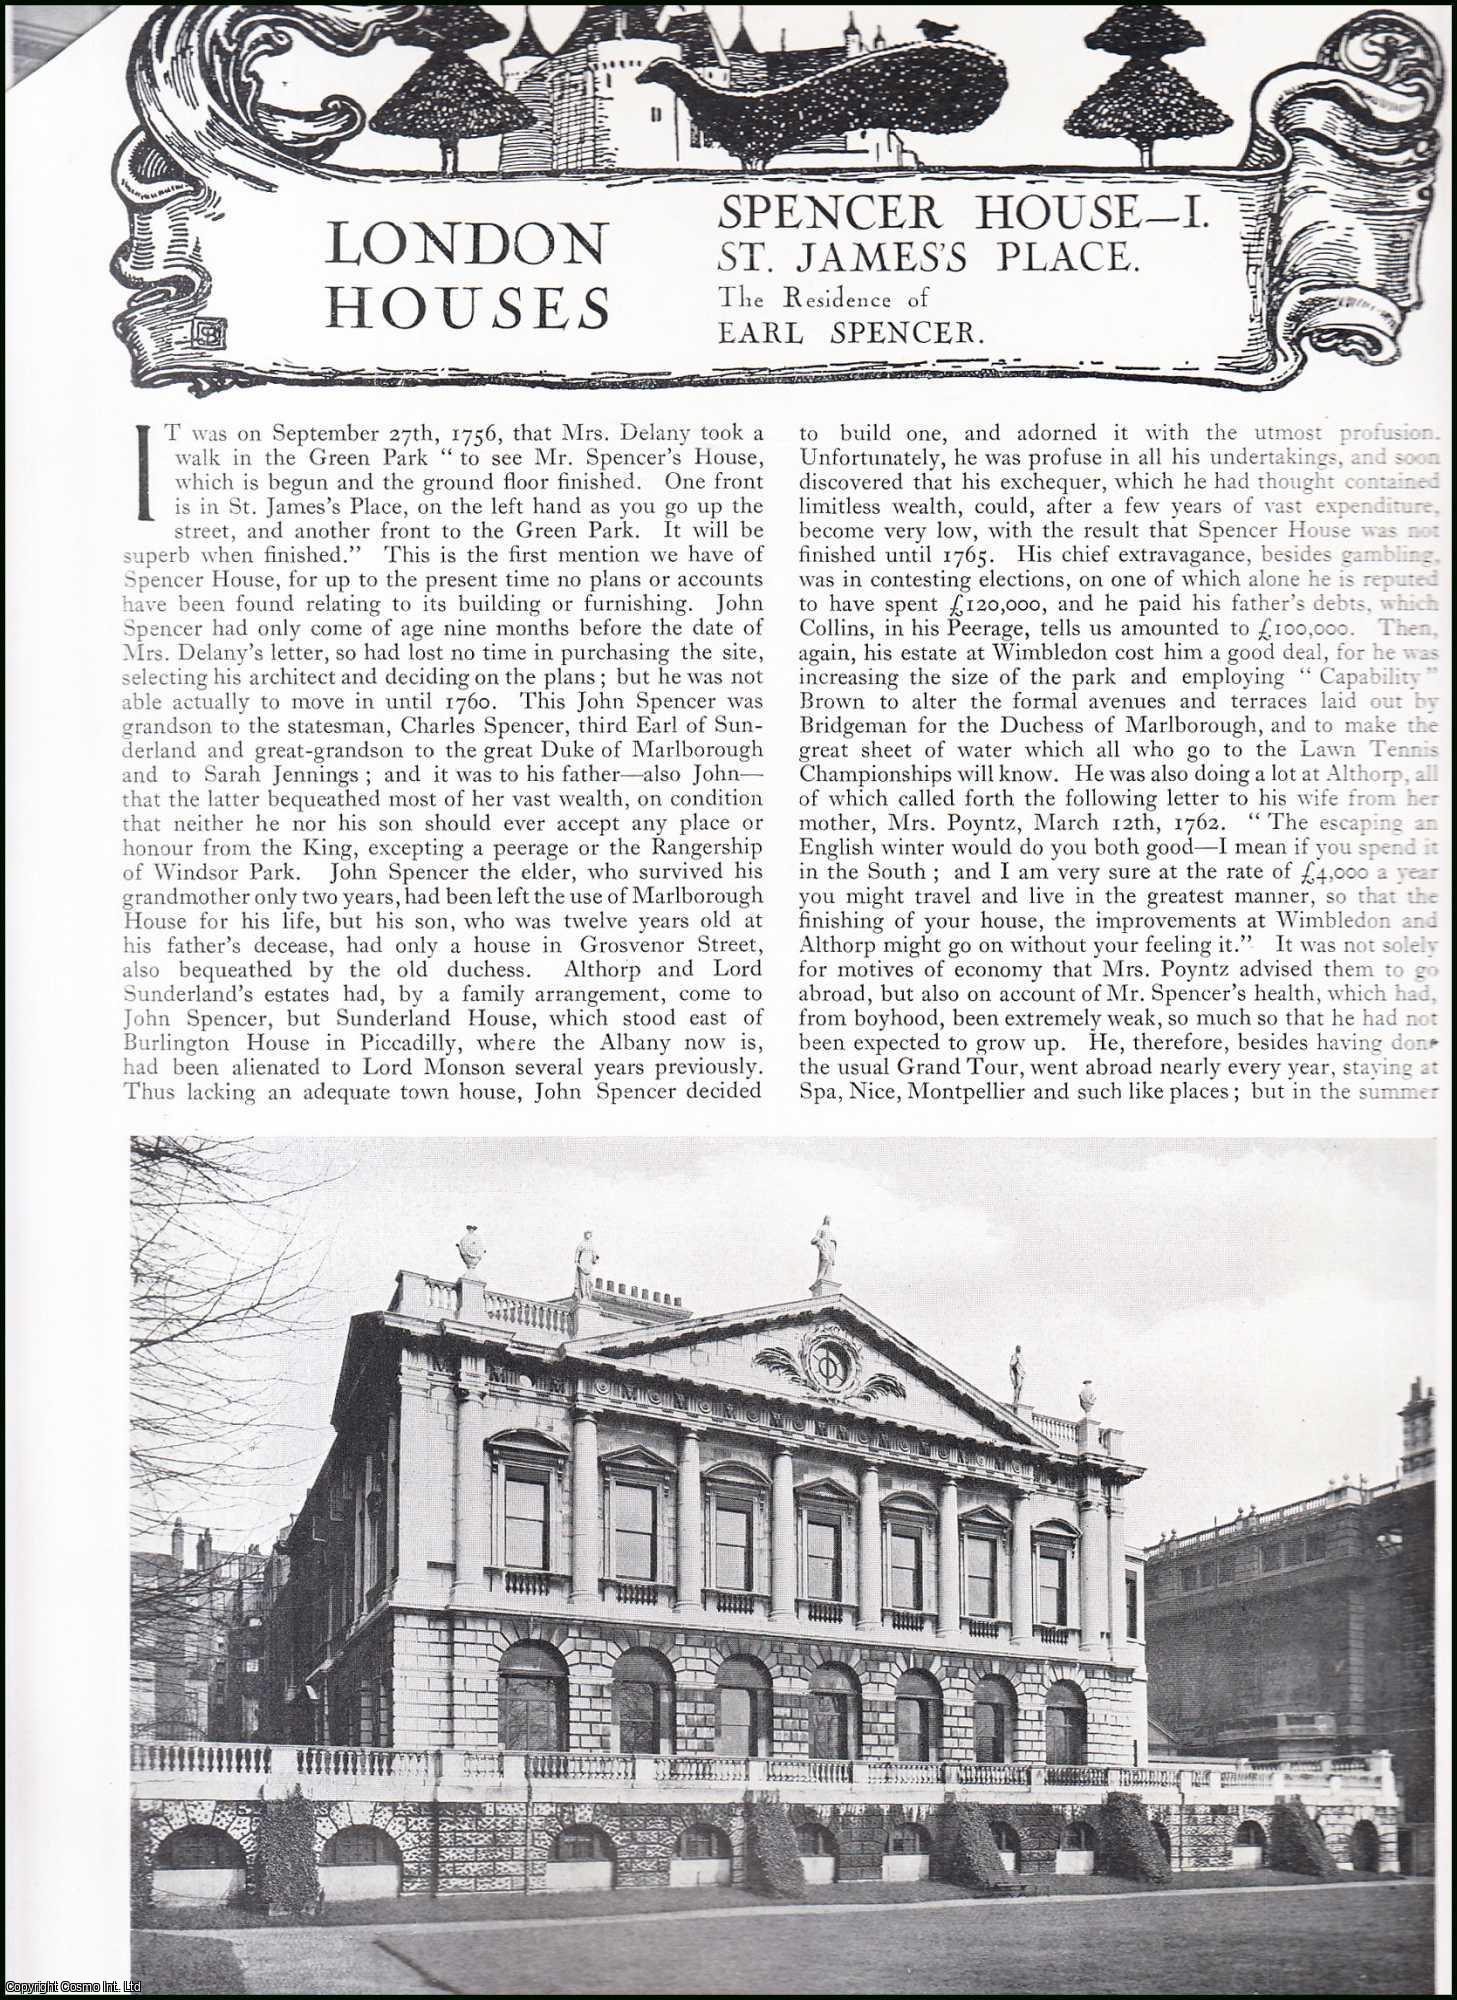 London Houses - Spencer House, (Part 1) St. James' Place. Several pictures and accompanying text, removed from an original issue of Country Life Magazine, 1926.